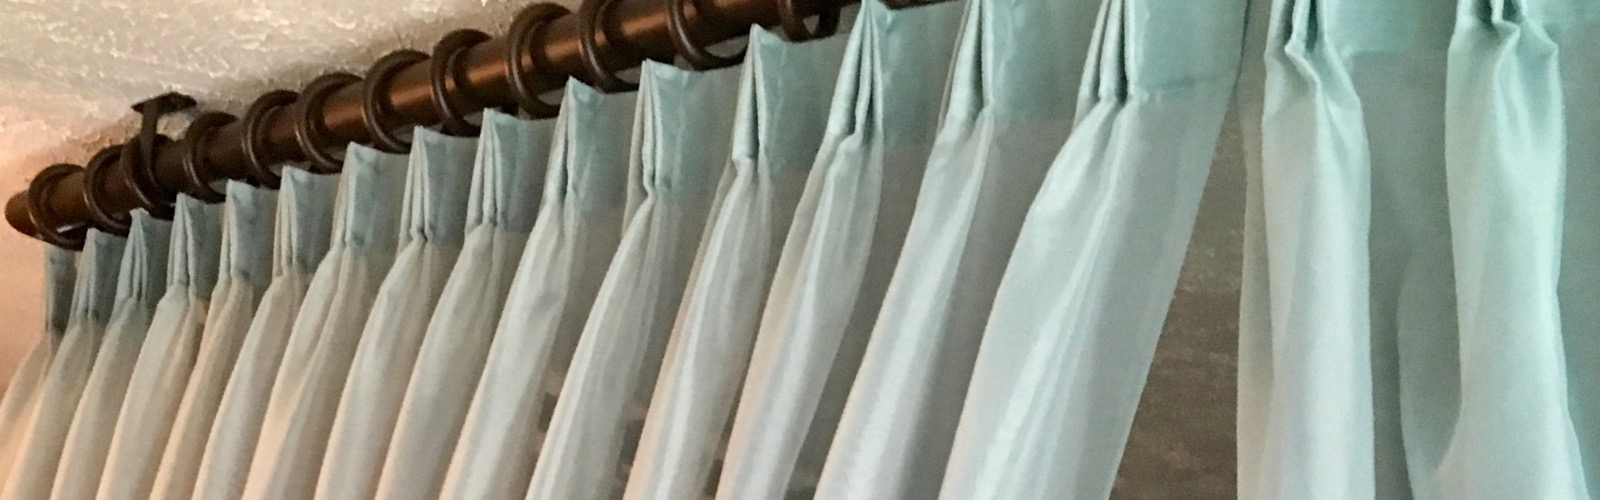 Custom Draperies Curtains Shades Windows Treatments and Furniture Upholstery Reupholstery Renewal and Restoration 20